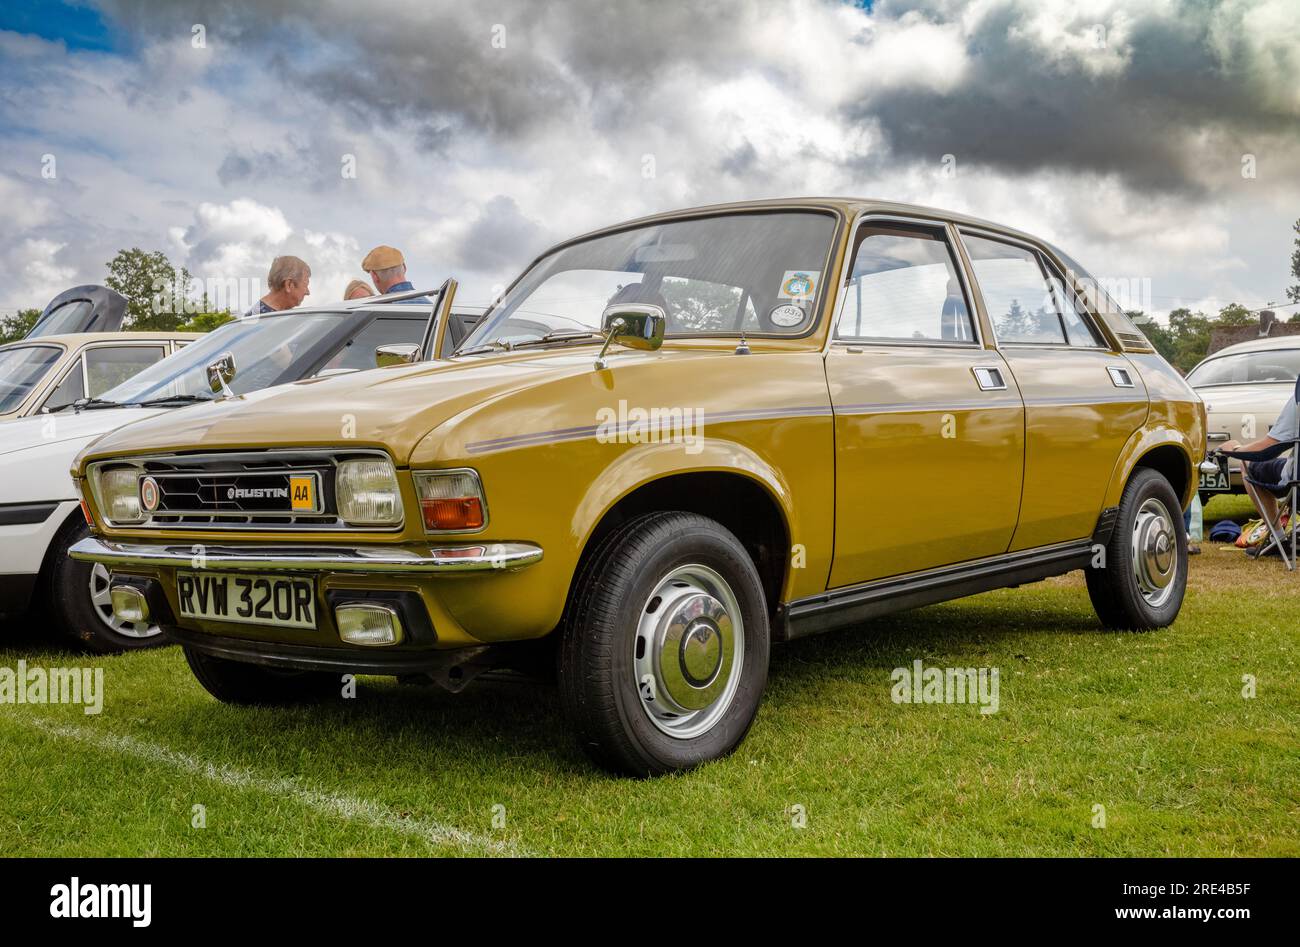 A gold-coloured 1976 Austin Allegro 1300SDL saloon car on display at a classic car show in Storrington, West Sussex, UK. Stock Photo